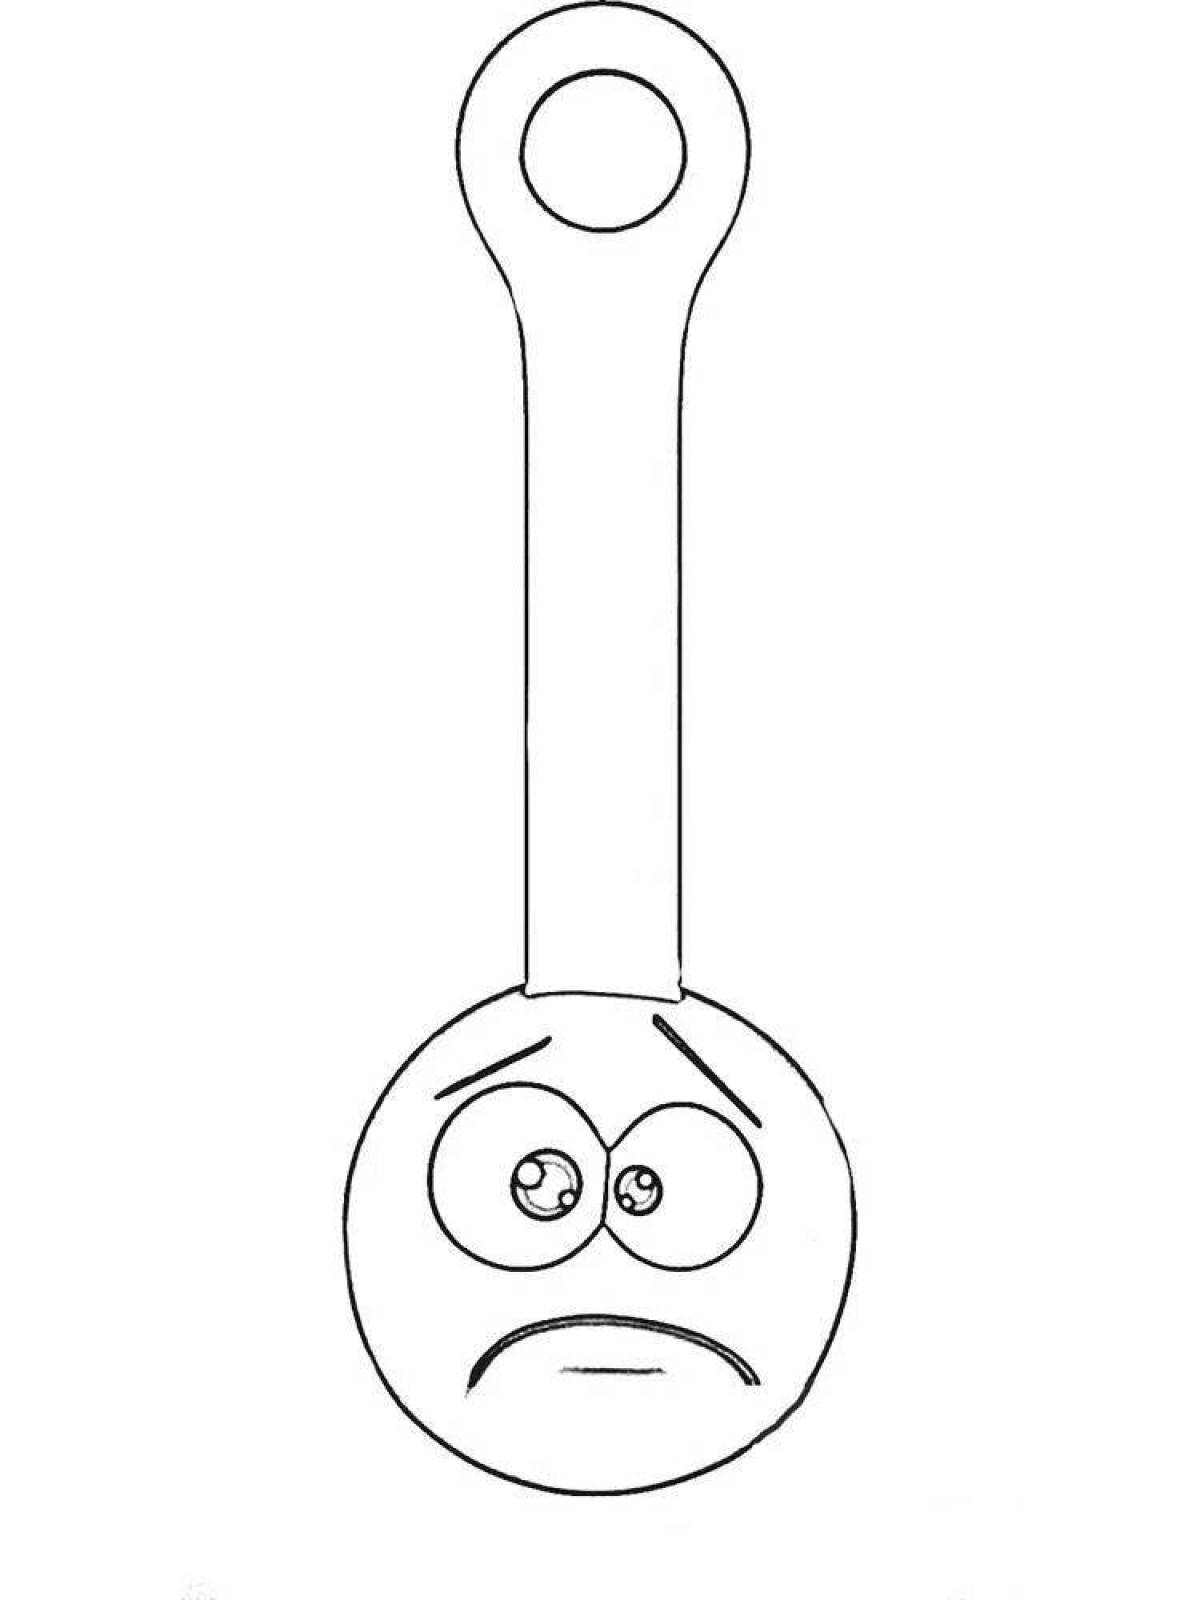 Coloring page for funny fasteners